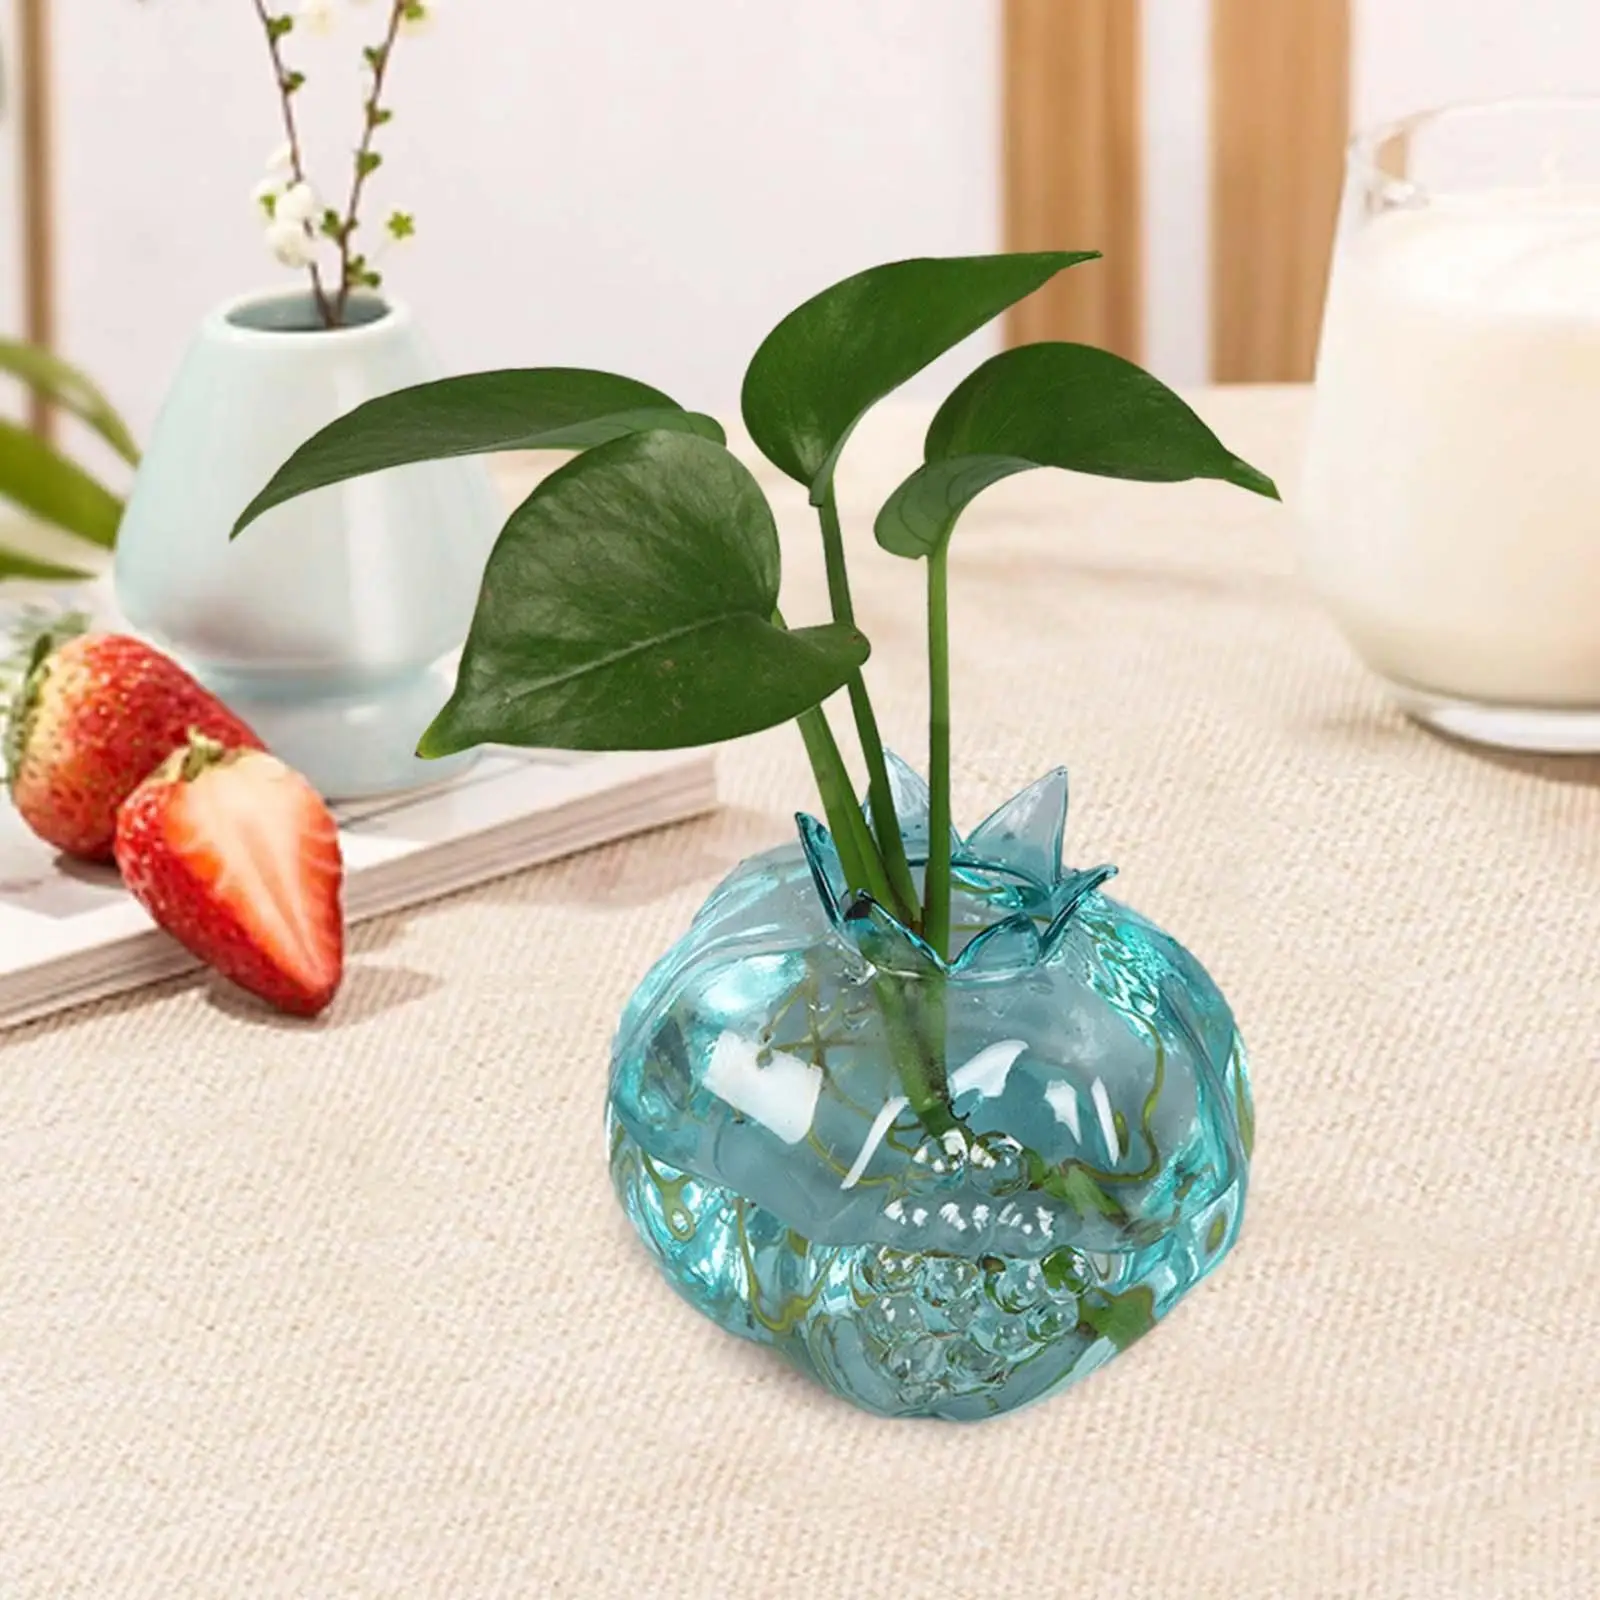 Creative Pomegranate Vase Decorative Flower Holder Container Clear Glass Vase for Birthday Gift Drawing Room Wedding Bar Bedroom